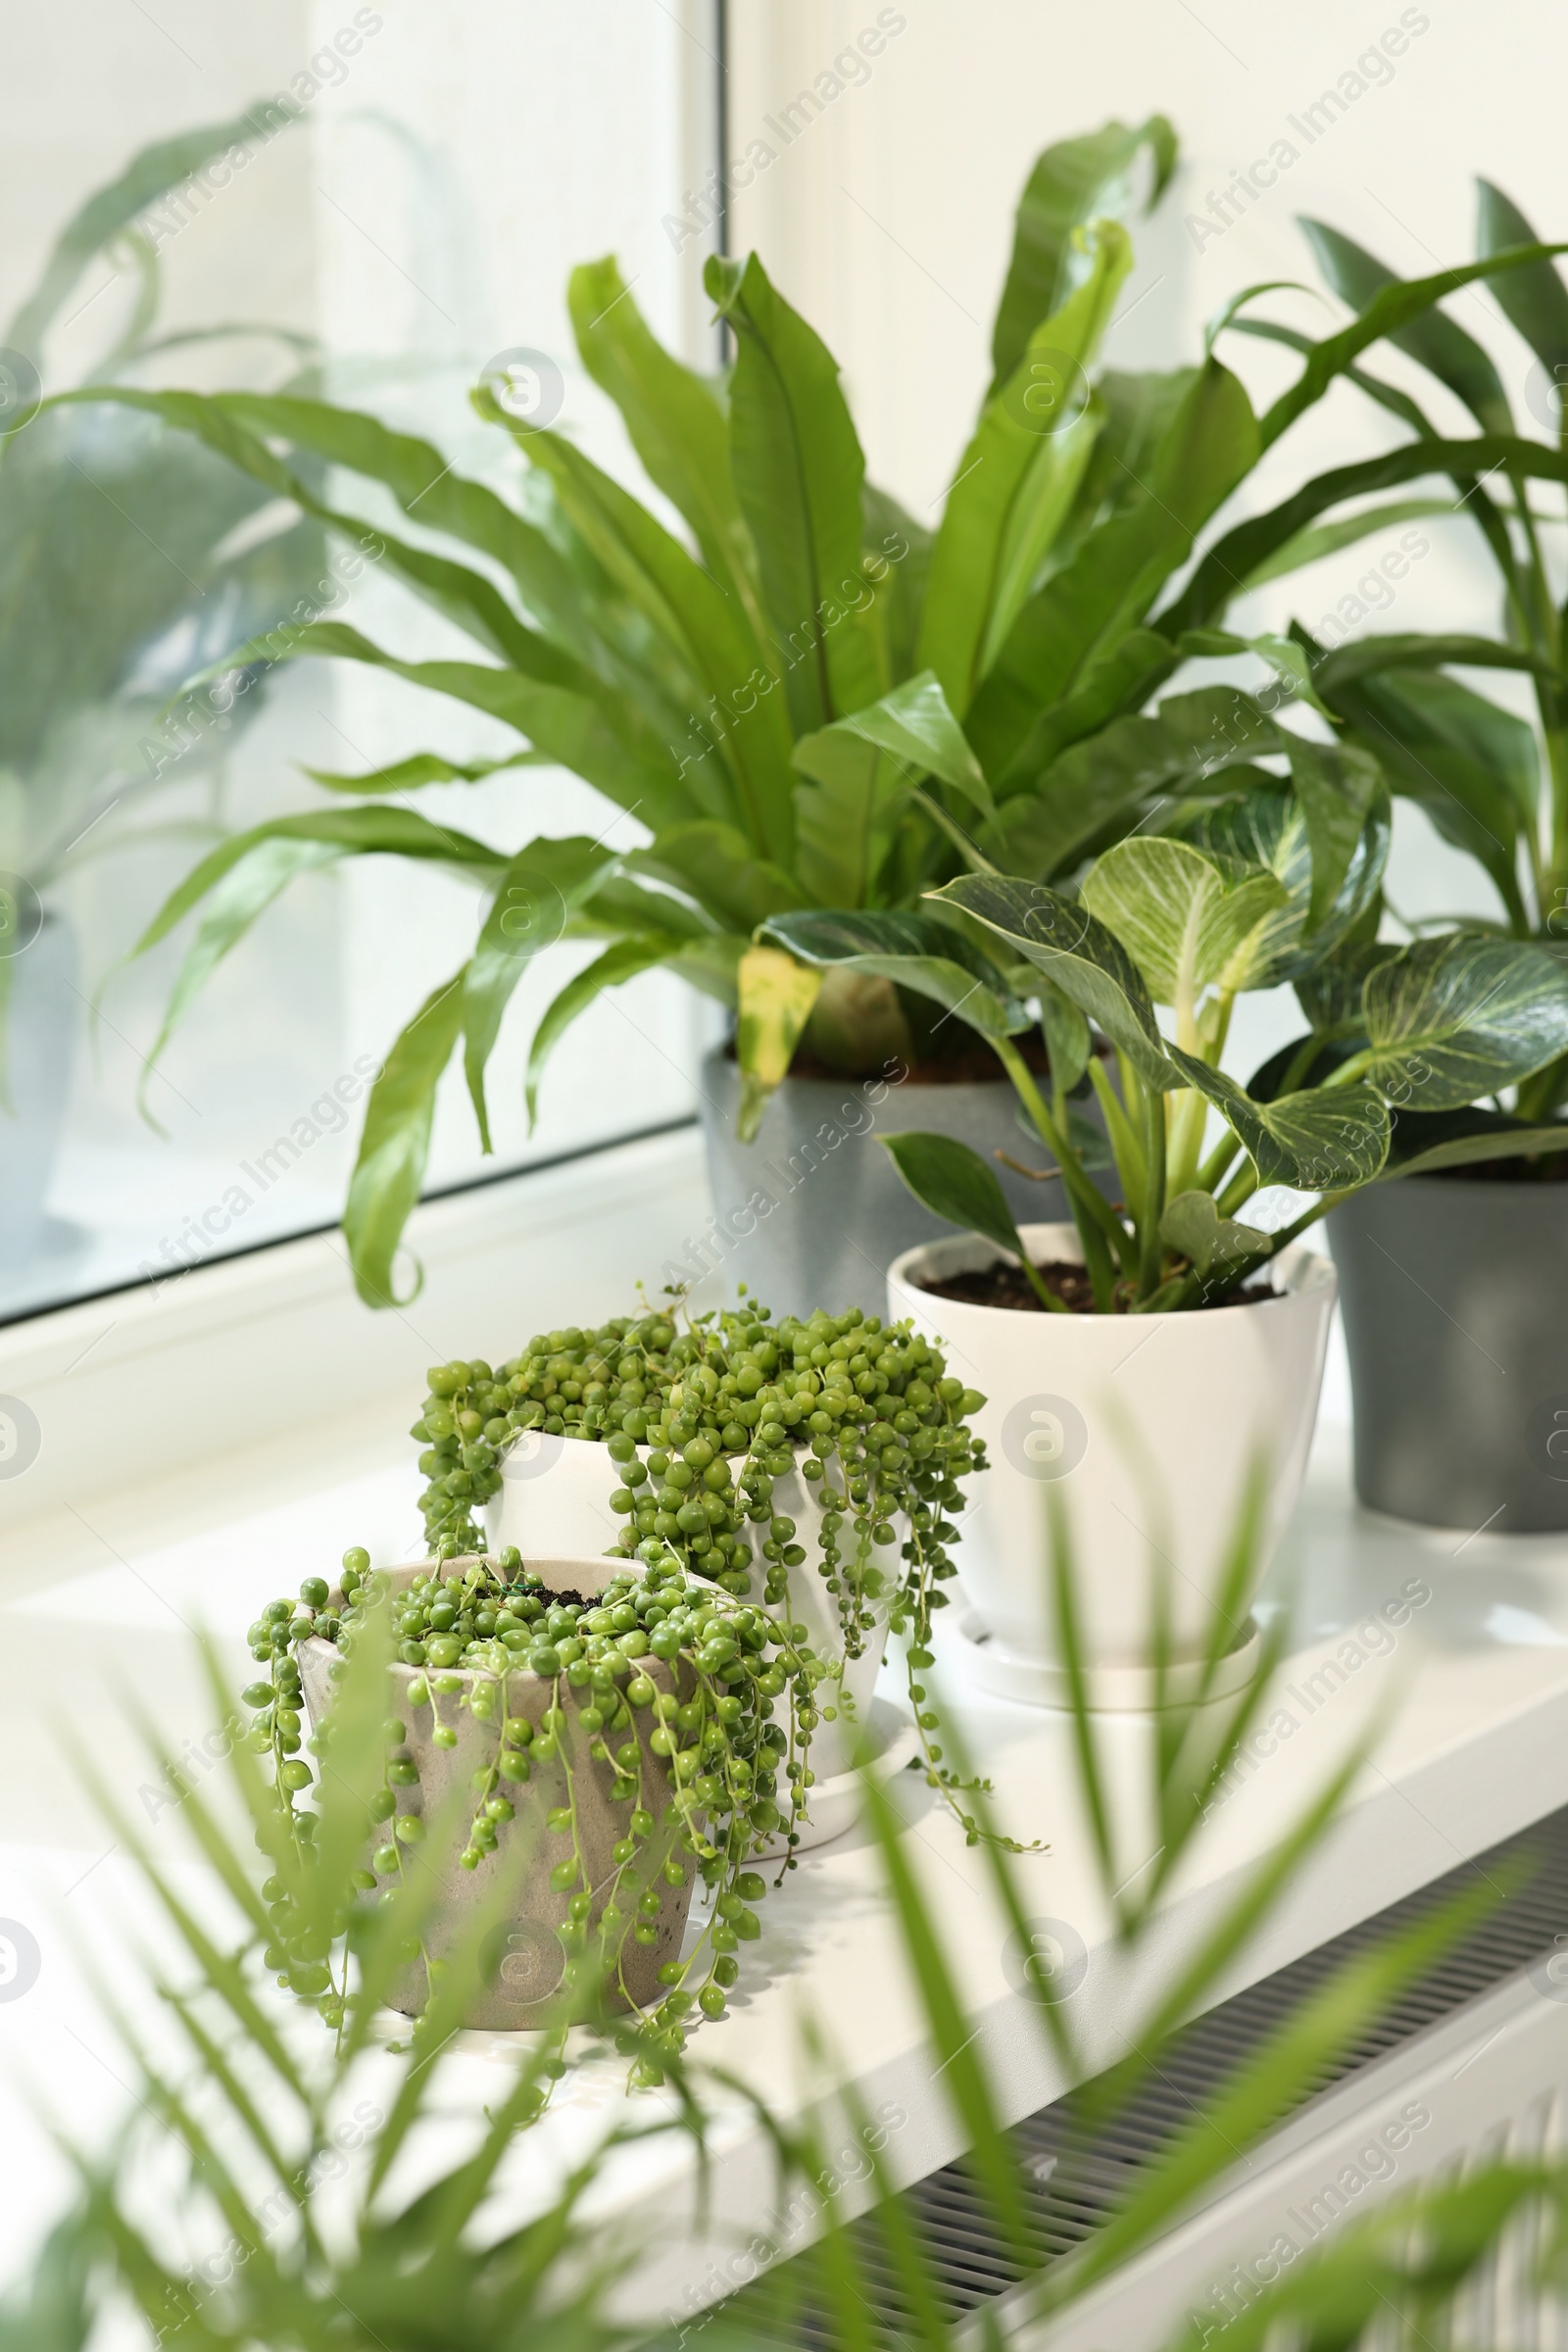 Photo of Many different potted plants on windowsill indoors